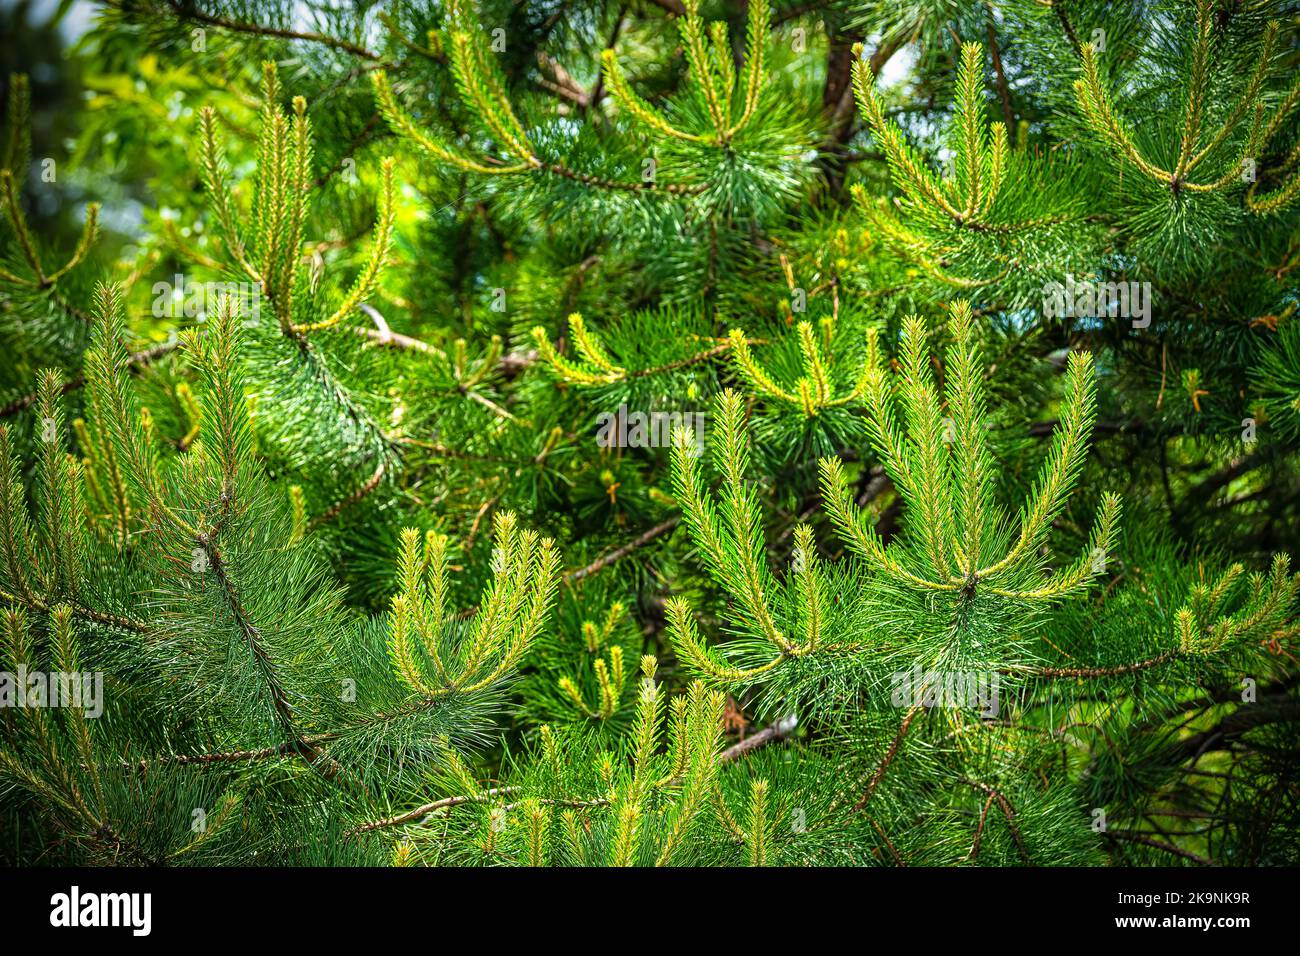 Young green evergreen coniferous spruce pine tree branches with needles in Virginia Shenandoah national park closeup Stock Photo